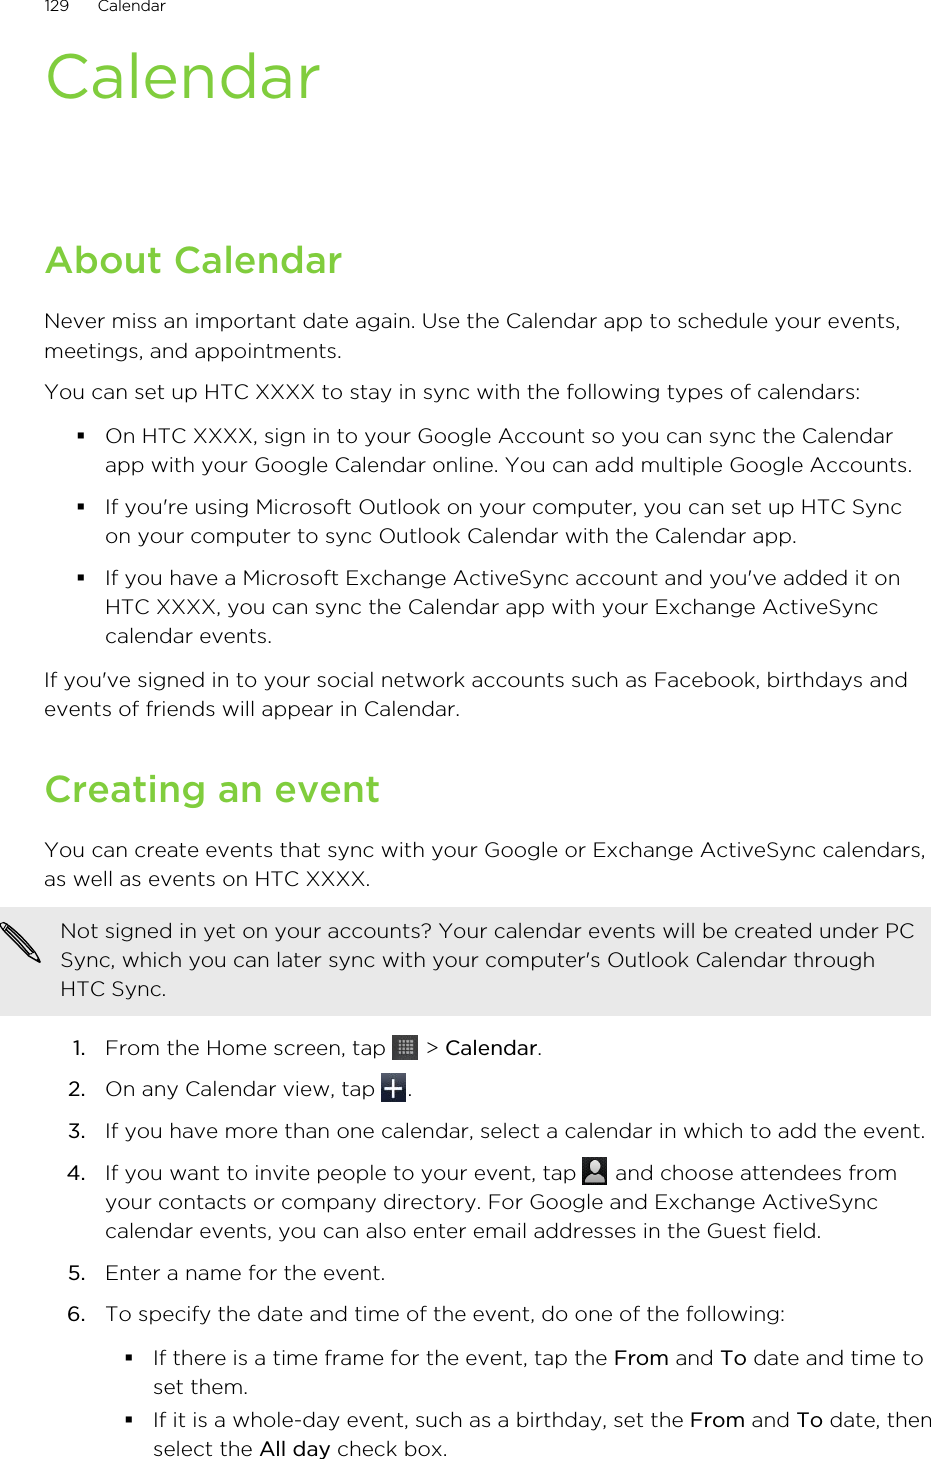 CalendarAbout CalendarNever miss an important date again. Use the Calendar app to schedule your events,meetings, and appointments.You can set up HTC XXXX to stay in sync with the following types of calendars:§On HTC XXXX, sign in to your Google Account so you can sync the Calendarapp with your Google Calendar online. You can add multiple Google Accounts.§If you&apos;re using Microsoft Outlook on your computer, you can set up HTC Syncon your computer to sync Outlook Calendar with the Calendar app.§If you have a Microsoft Exchange ActiveSync account and you&apos;ve added it onHTC XXXX, you can sync the Calendar app with your Exchange ActiveSynccalendar events.If you&apos;ve signed in to your social network accounts such as Facebook, birthdays andevents of friends will appear in Calendar.Creating an eventYou can create events that sync with your Google or Exchange ActiveSync calendars,as well as events on HTC XXXX.Not signed in yet on your accounts? Your calendar events will be created under PCSync, which you can later sync with your computer&apos;s Outlook Calendar throughHTC Sync.1. From the Home screen, tap   &gt; Calendar.2. On any Calendar view, tap  .3. If you have more than one calendar, select a calendar in which to add the event.4. If you want to invite people to your event, tap   and choose attendees fromyour contacts or company directory. For Google and Exchange ActiveSynccalendar events, you can also enter email addresses in the Guest field.5. Enter a name for the event.6. To specify the date and time of the event, do one of the following:§If there is a time frame for the event, tap the From and To date and time toset them.§If it is a whole-day event, such as a birthday, set the From and To date, thenselect the All day check box.129 Calendar